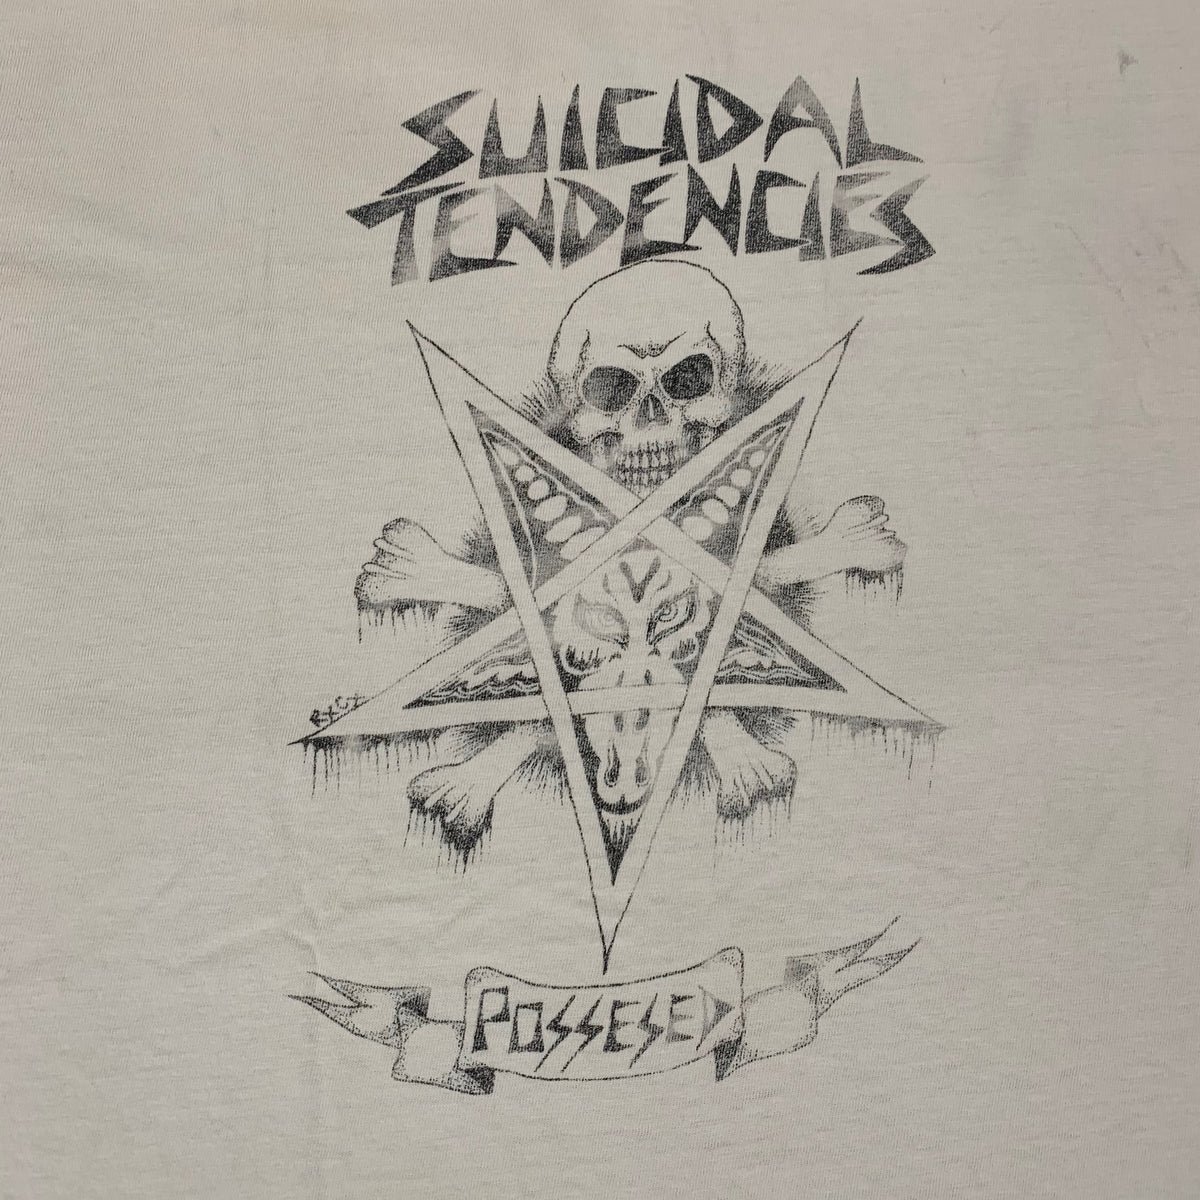 Vintage Suicidal Tendencies &quot;Possessed To Skate&quot; T-Shirt - jointcustodydc